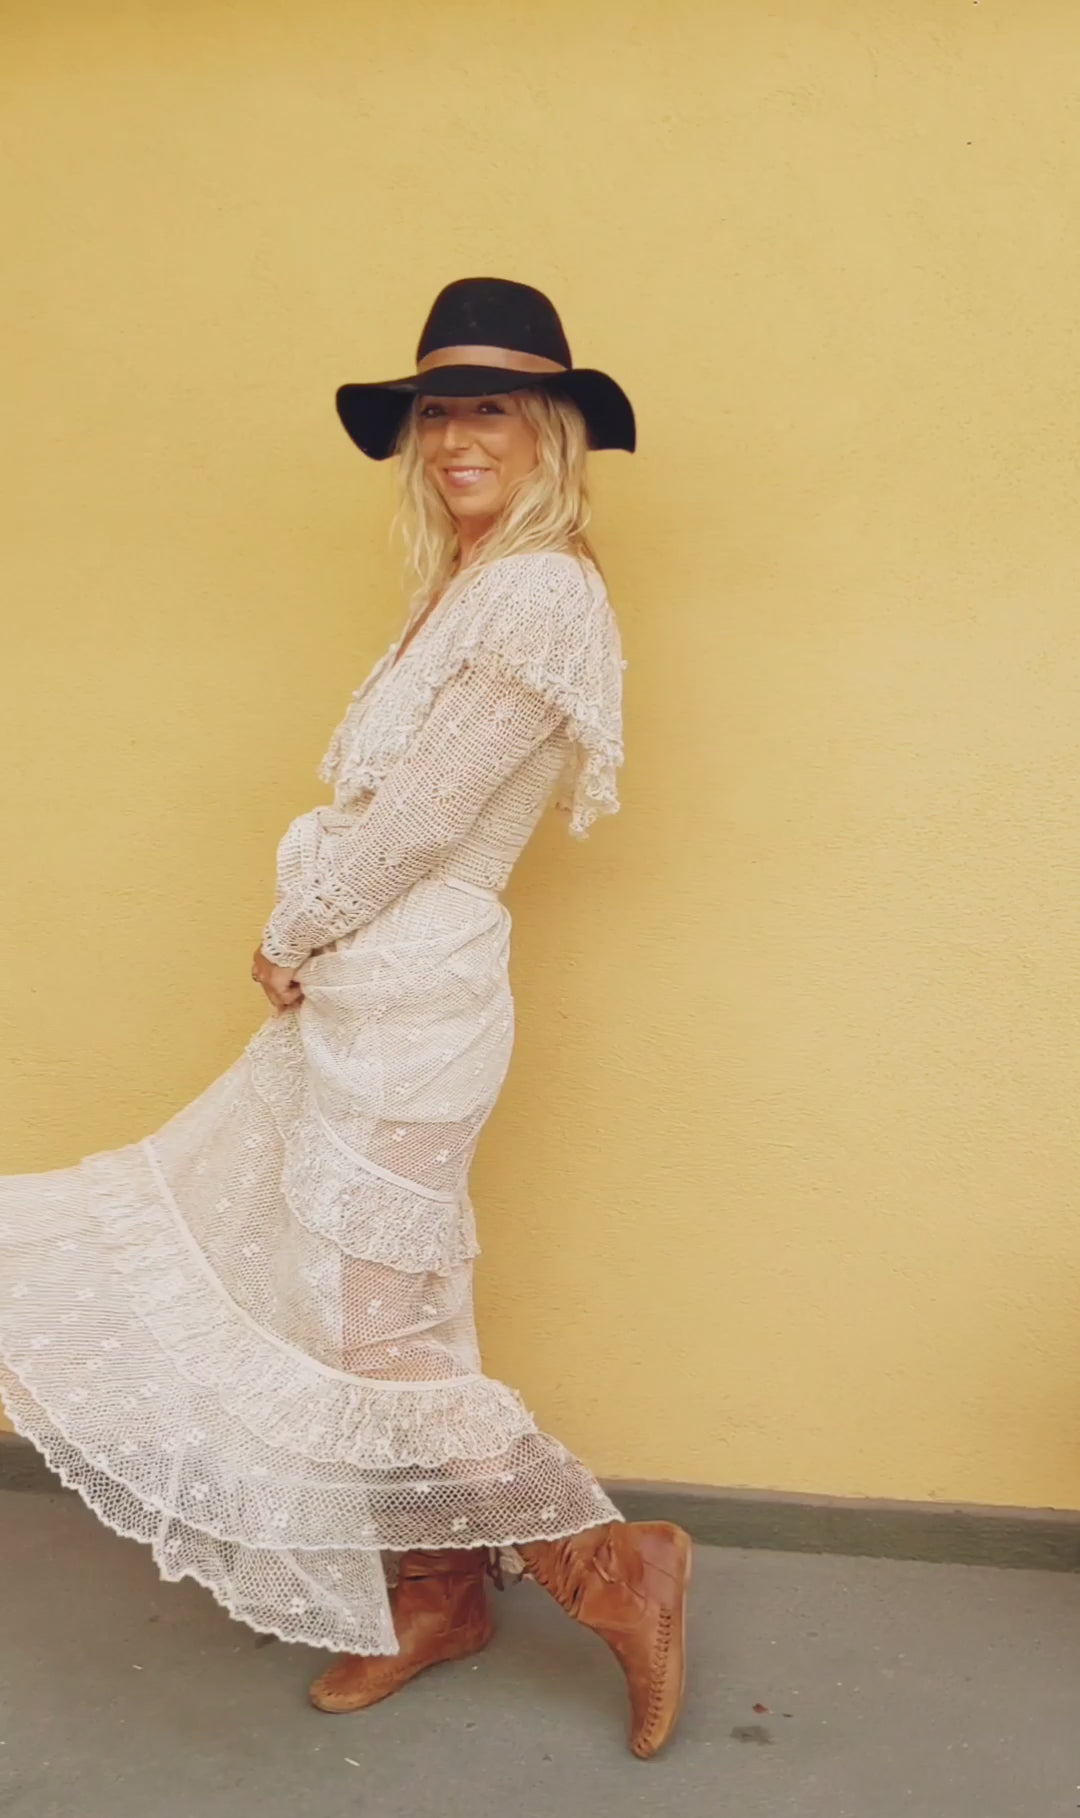 Video of model wearing Natural colored Lim's crochet maxi dress with ruffles and two-tiered ruffled hem.  